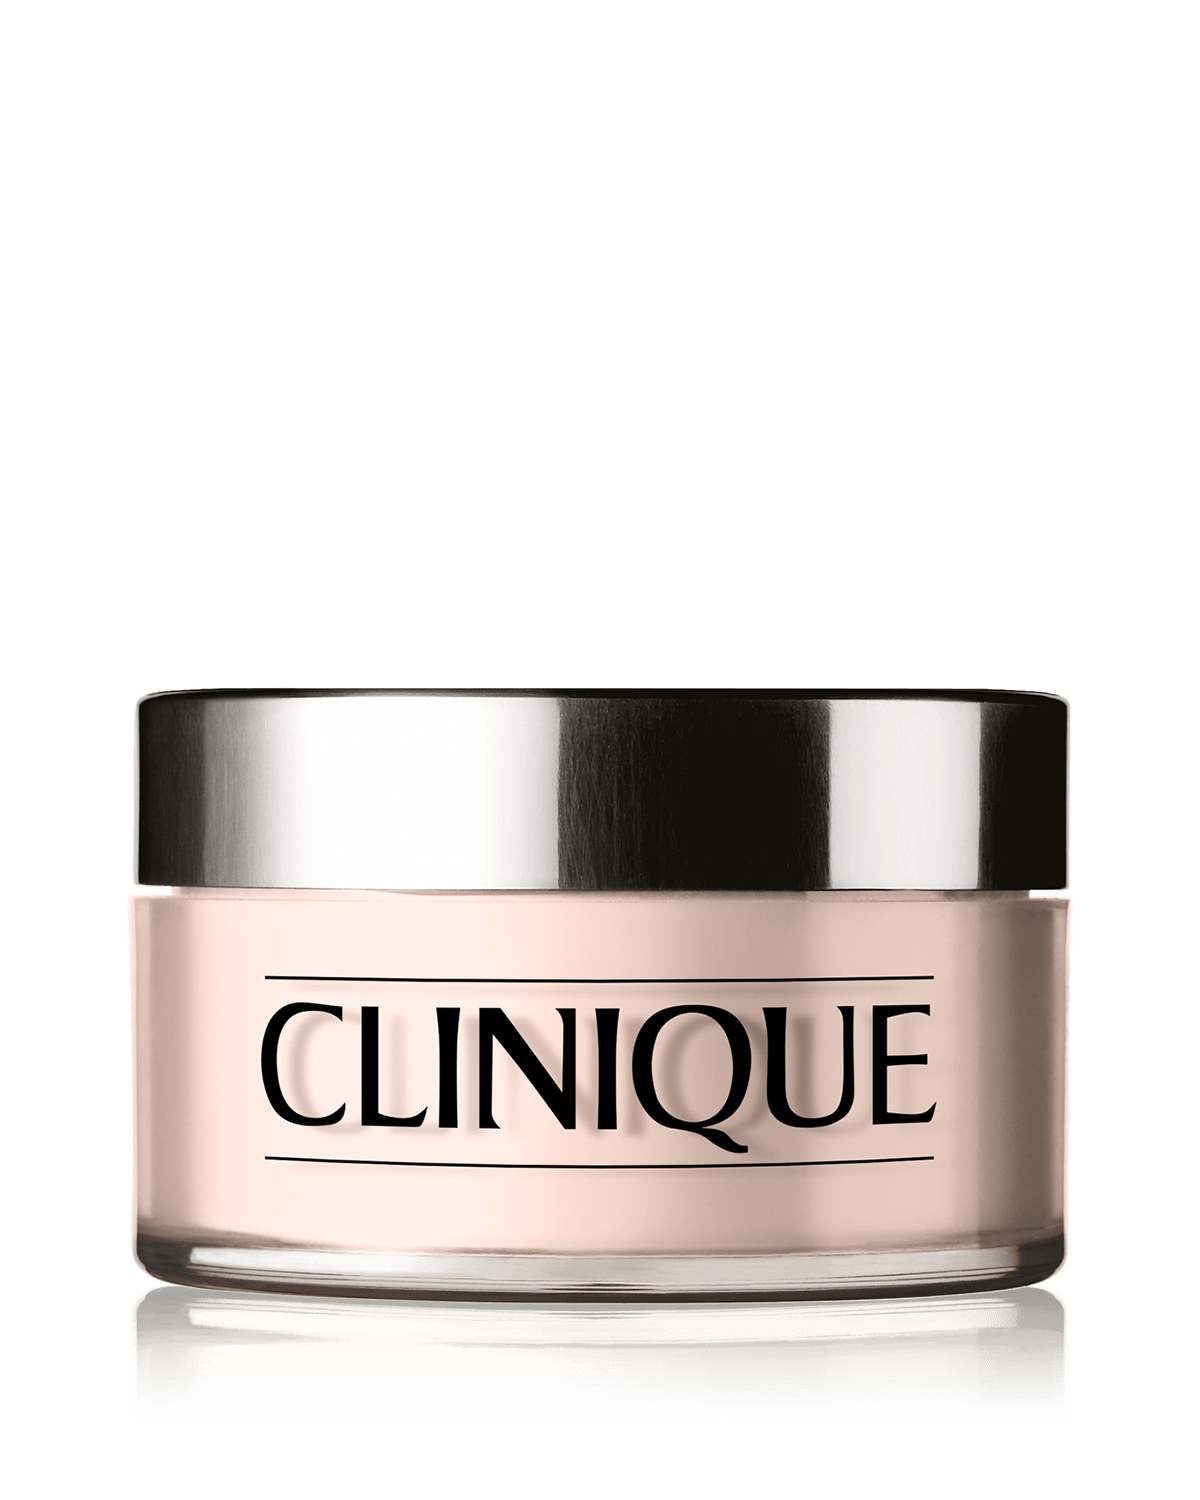 Clinique Blended Face Powder and Brush, Shade 03